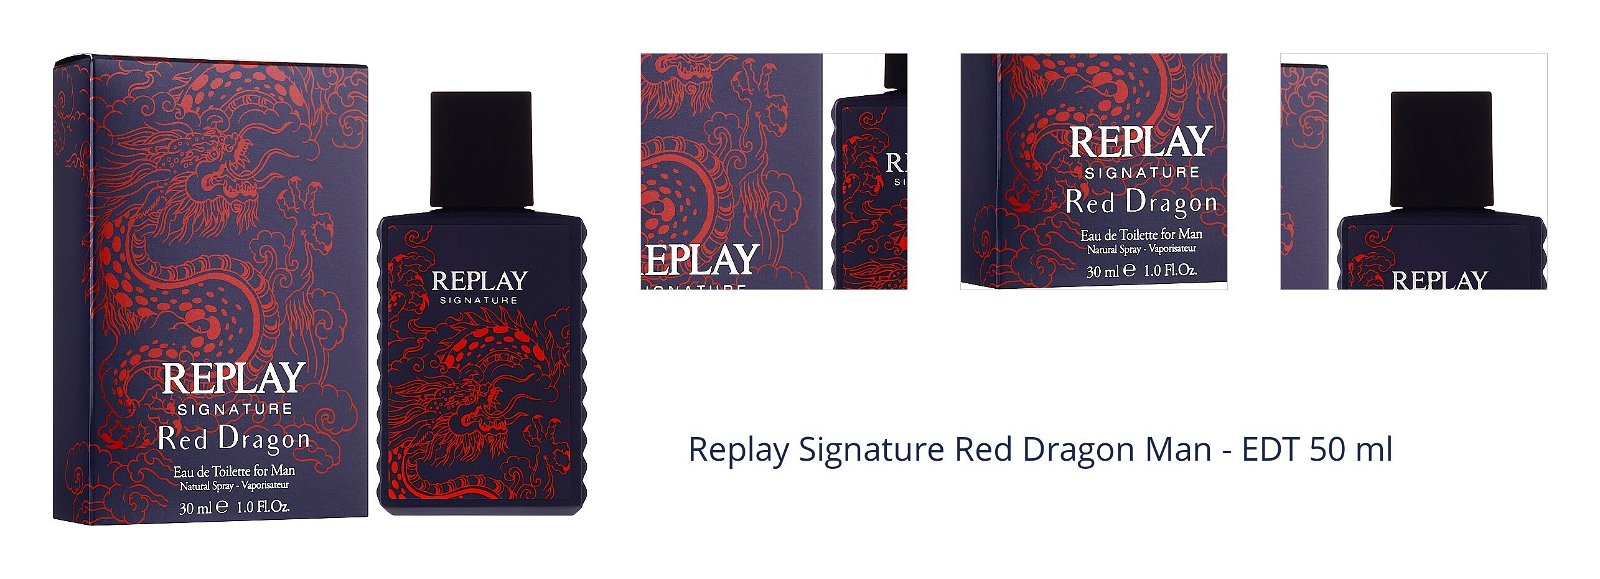 Replay Signature Red Dragon Man - EDT 50 ml 1